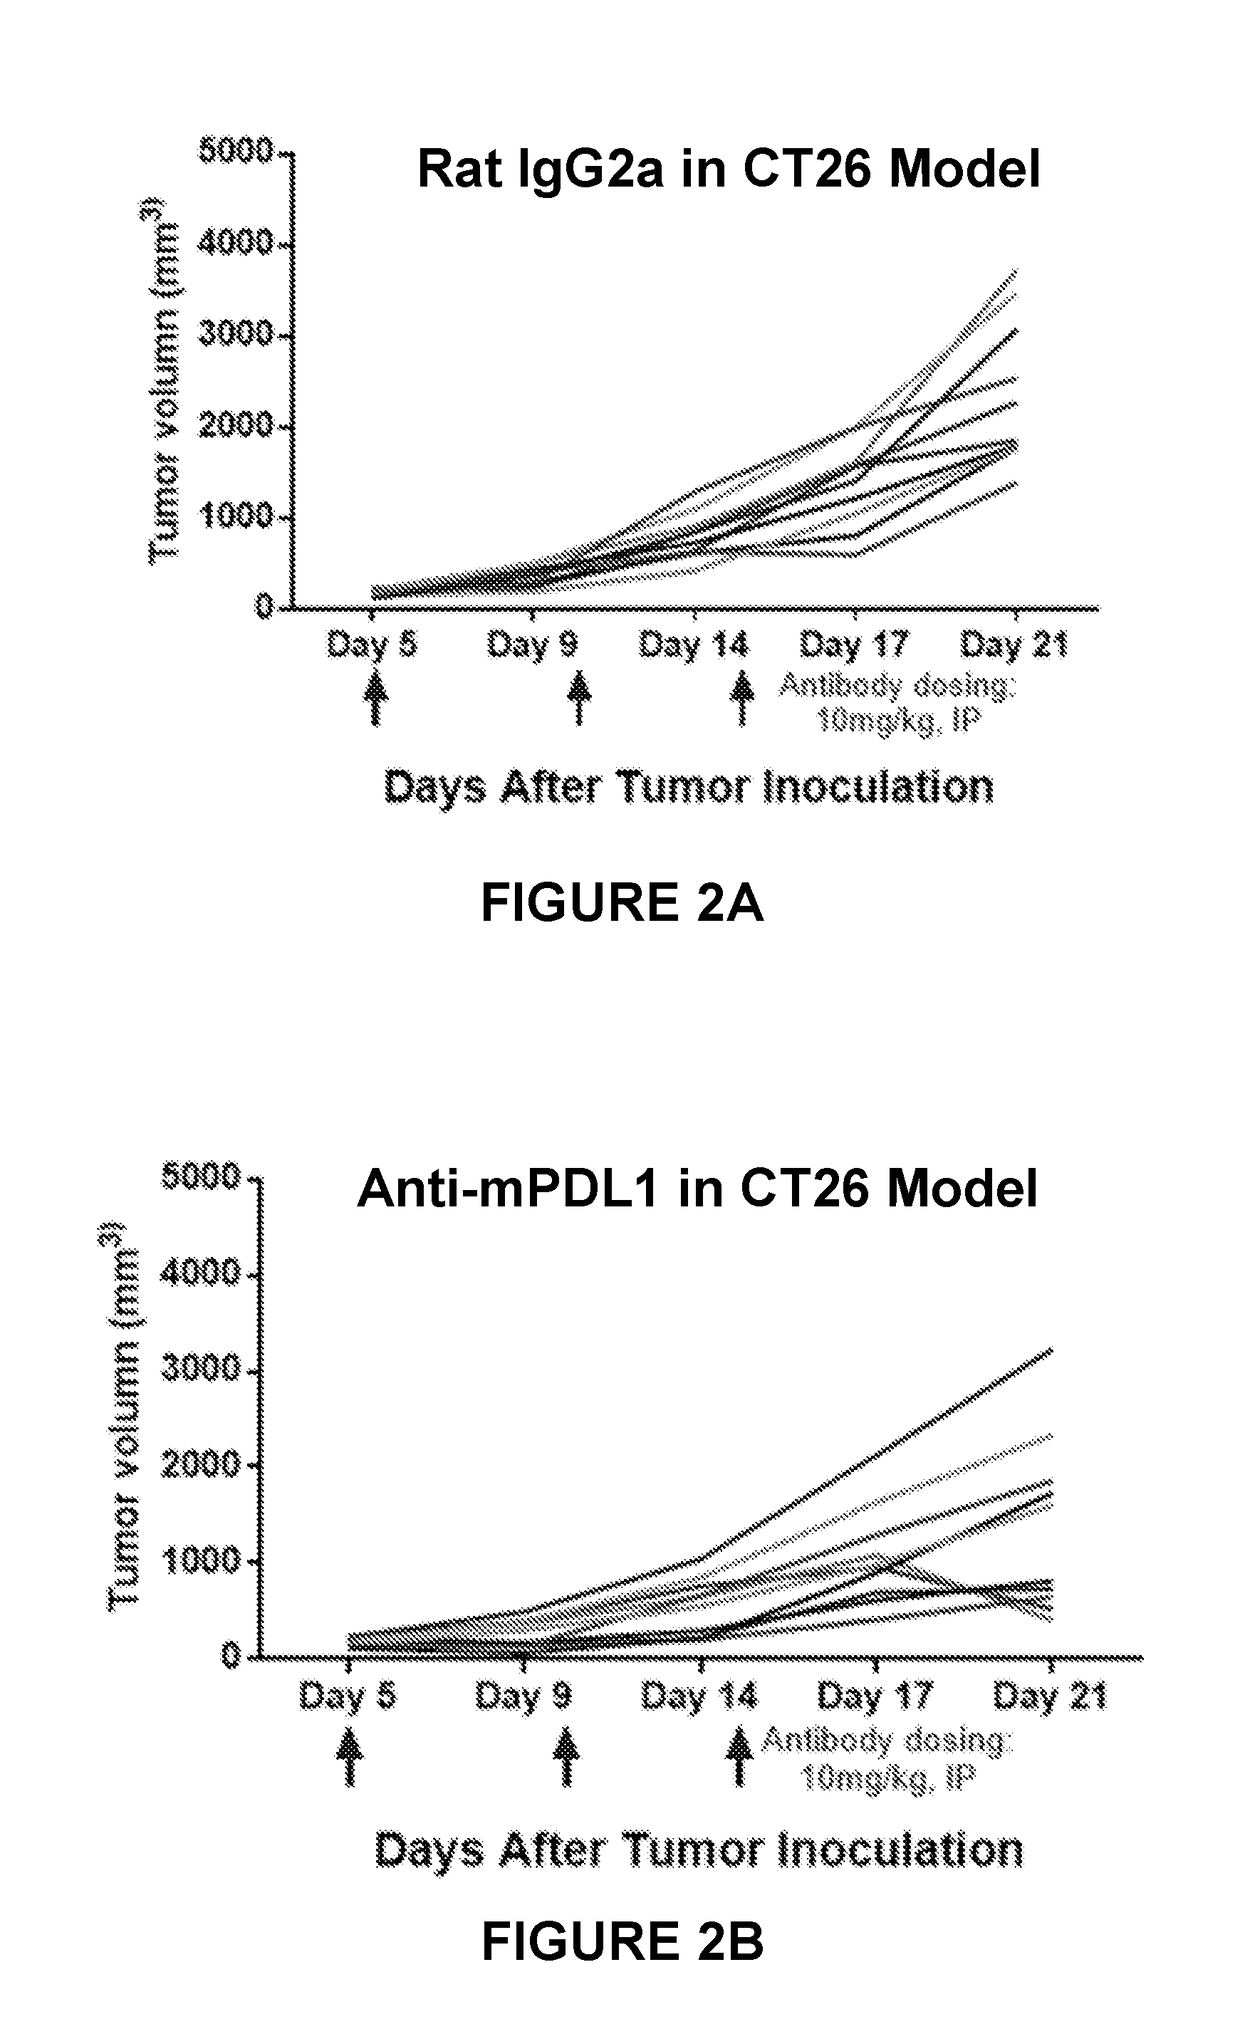 Combination of a PD-1 Axis Binding Antagonist and an ALK Inhibitor for Treating ALK-Negative Cancer